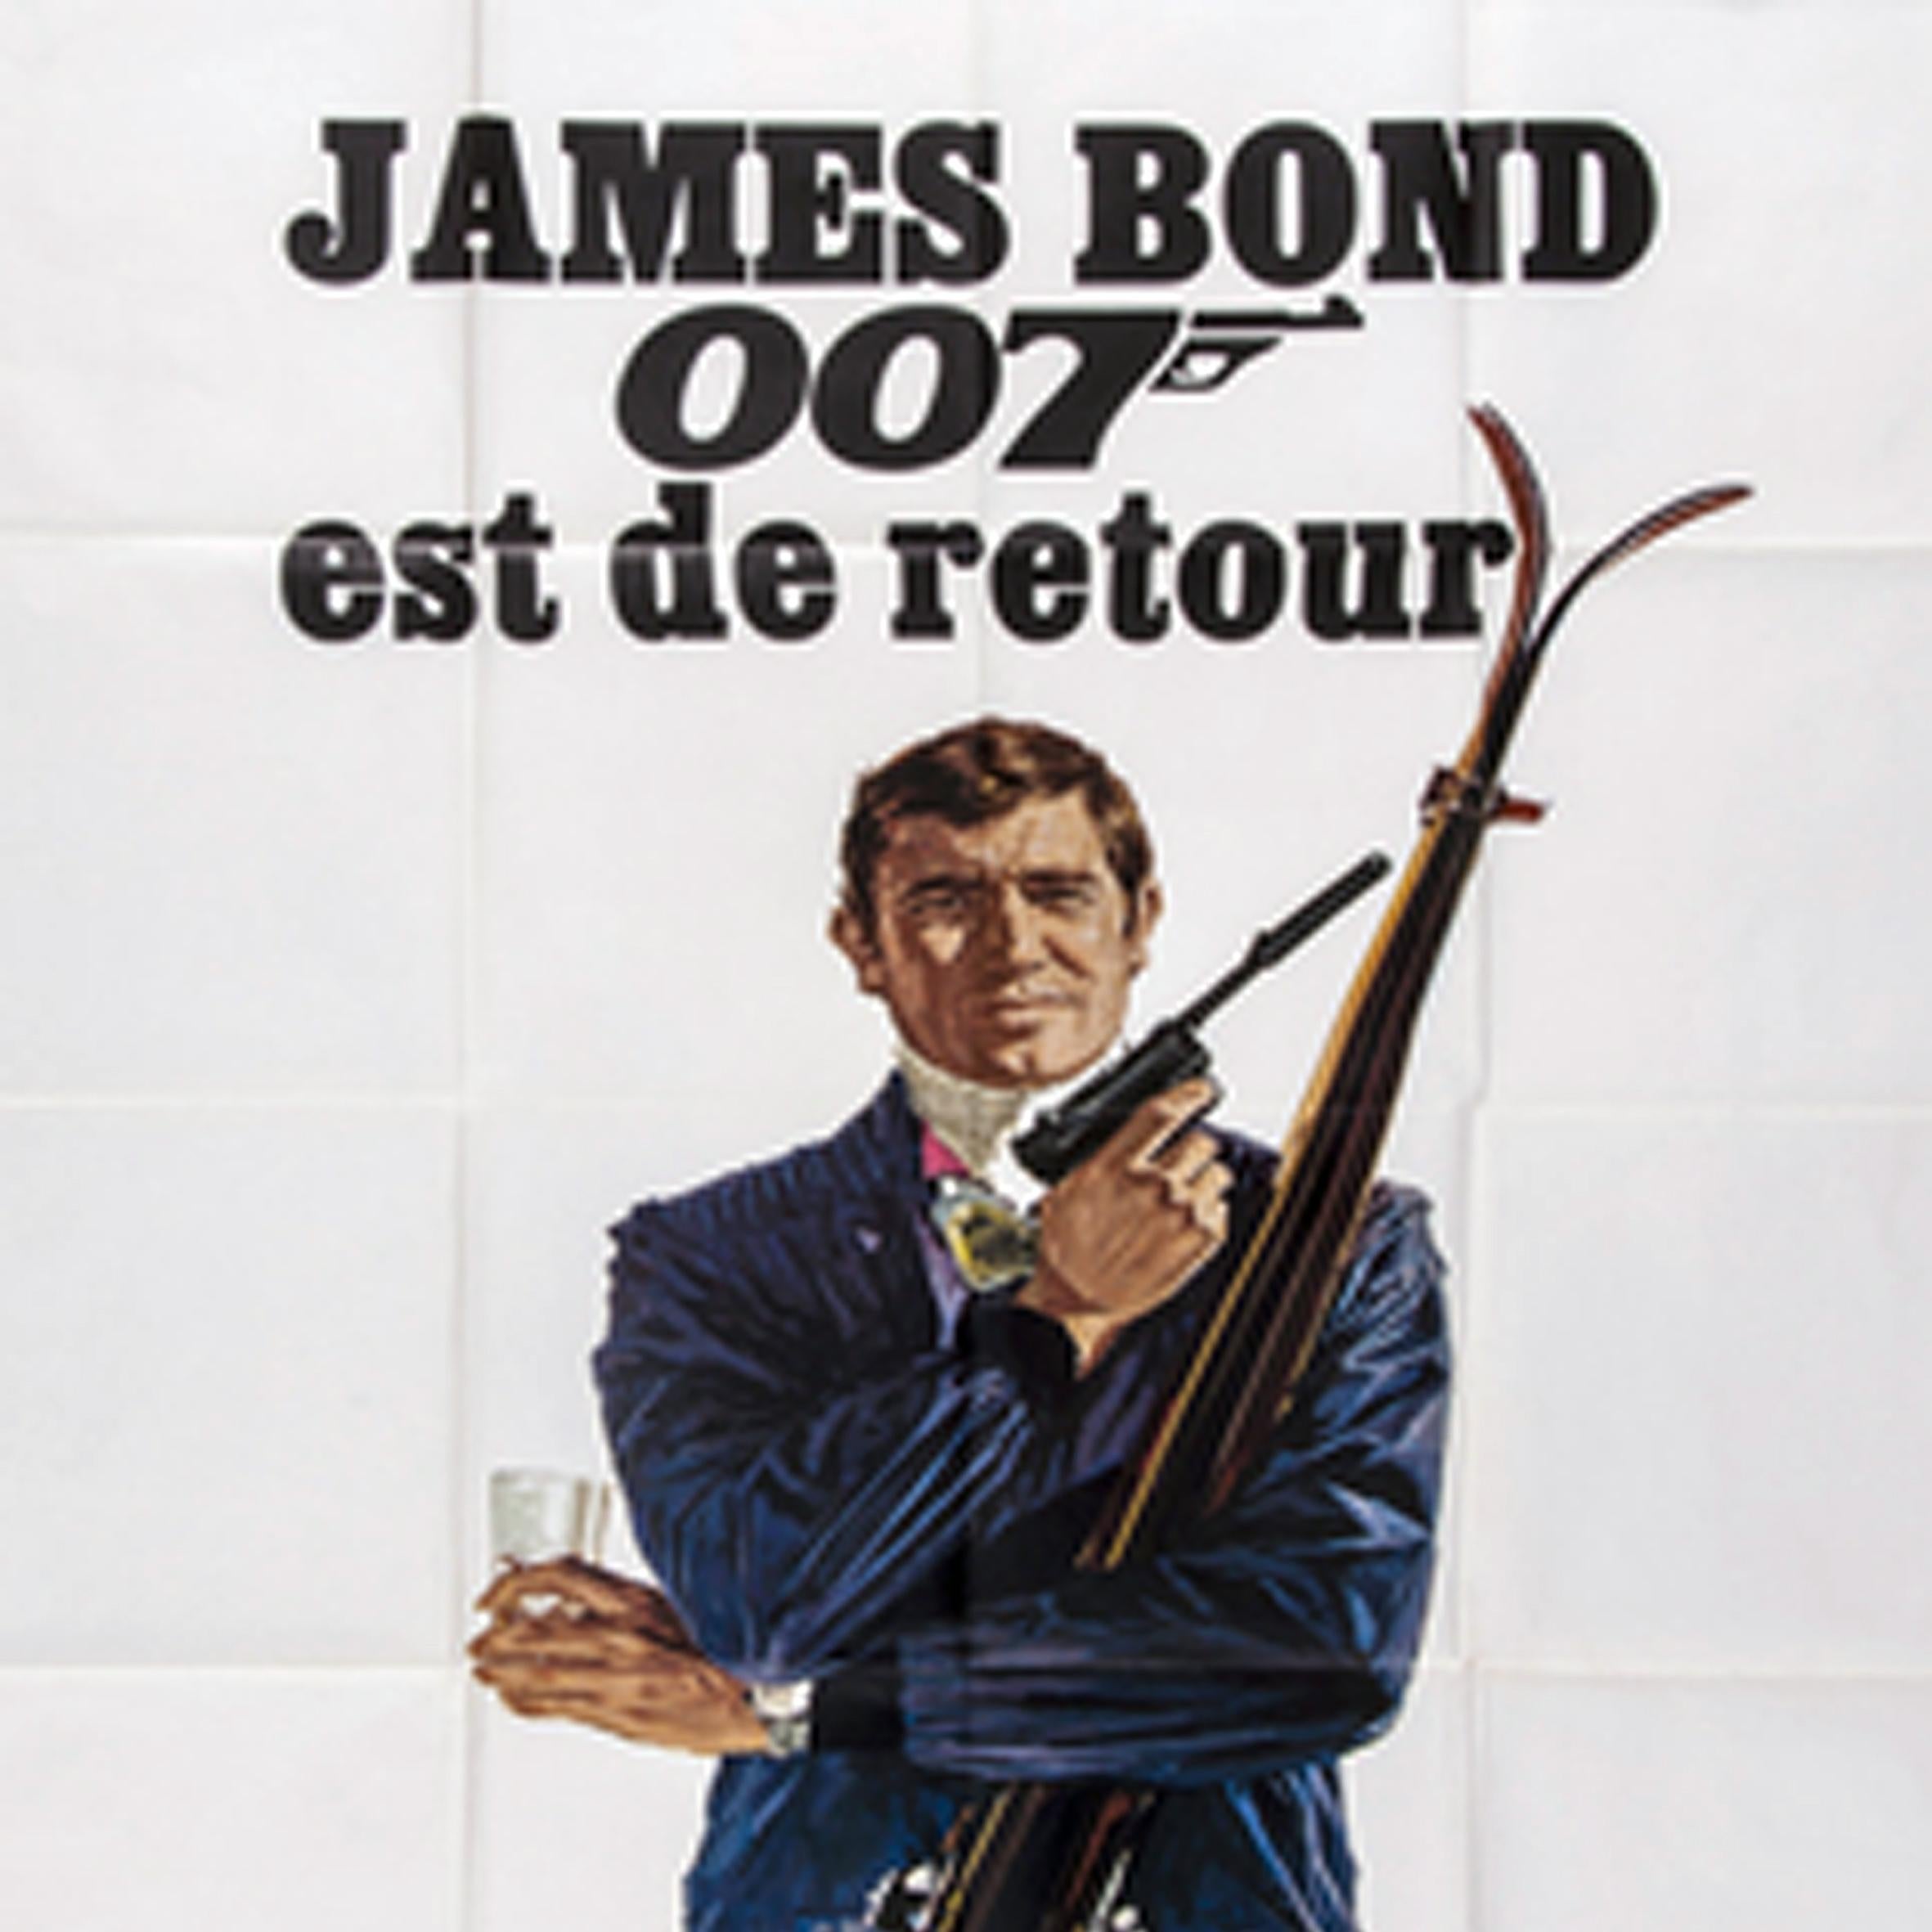 Original rare extra large movie poster for the French release of the 007 film On Her Majesty's Secret Service / Au Service Secret De Sa Majeste directed by Peter R. Hunt, produced by Harry Saltzman and Albert R. Broccoli, and starring George Lazenby